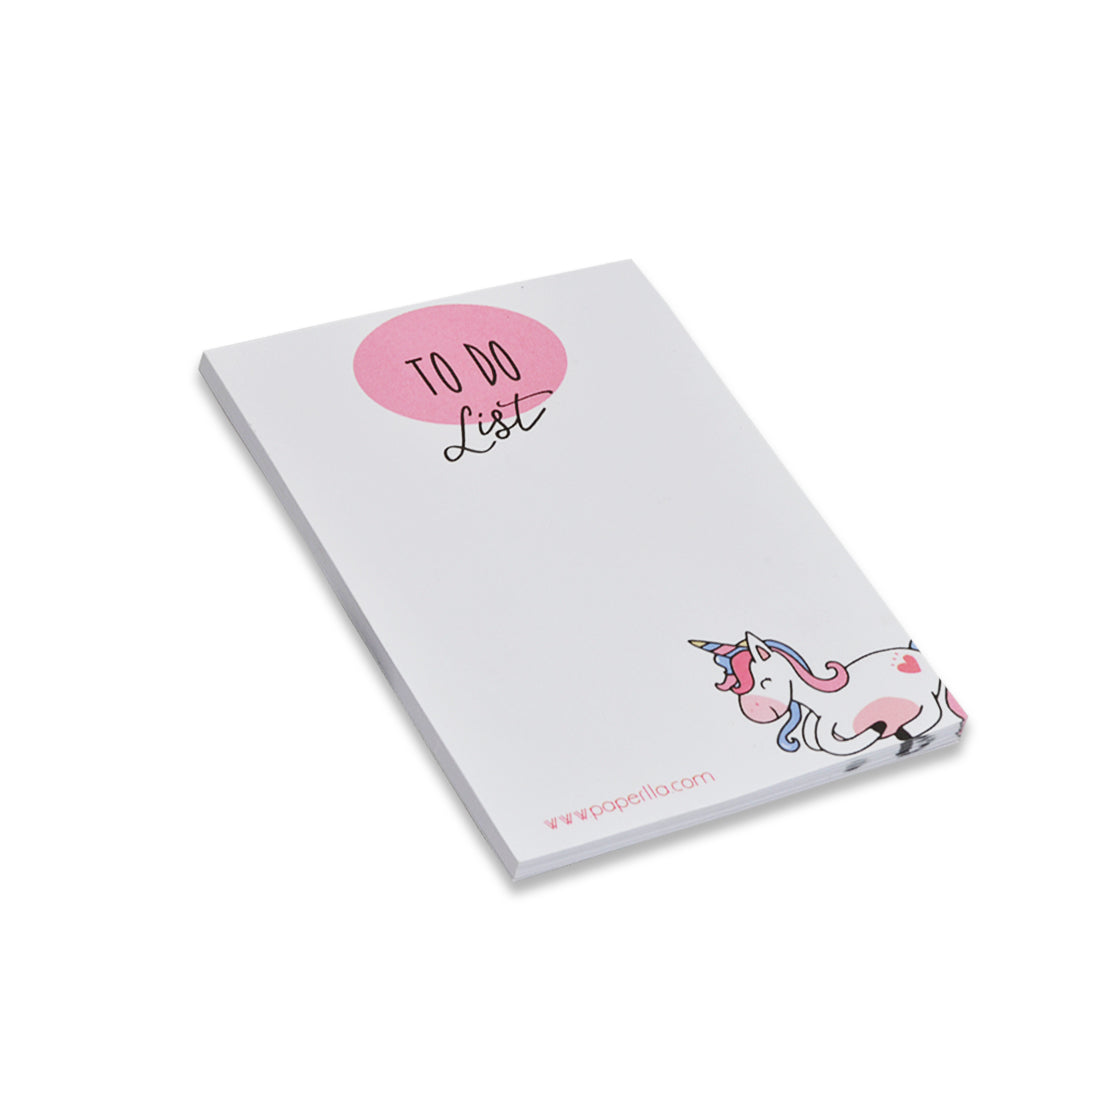 To Do List Notepad, Notes, to-Do’s, to-Buy, Priorities Memo Pad for Shopping Lists, Reminders and appointments Set of 6 Writing Pads